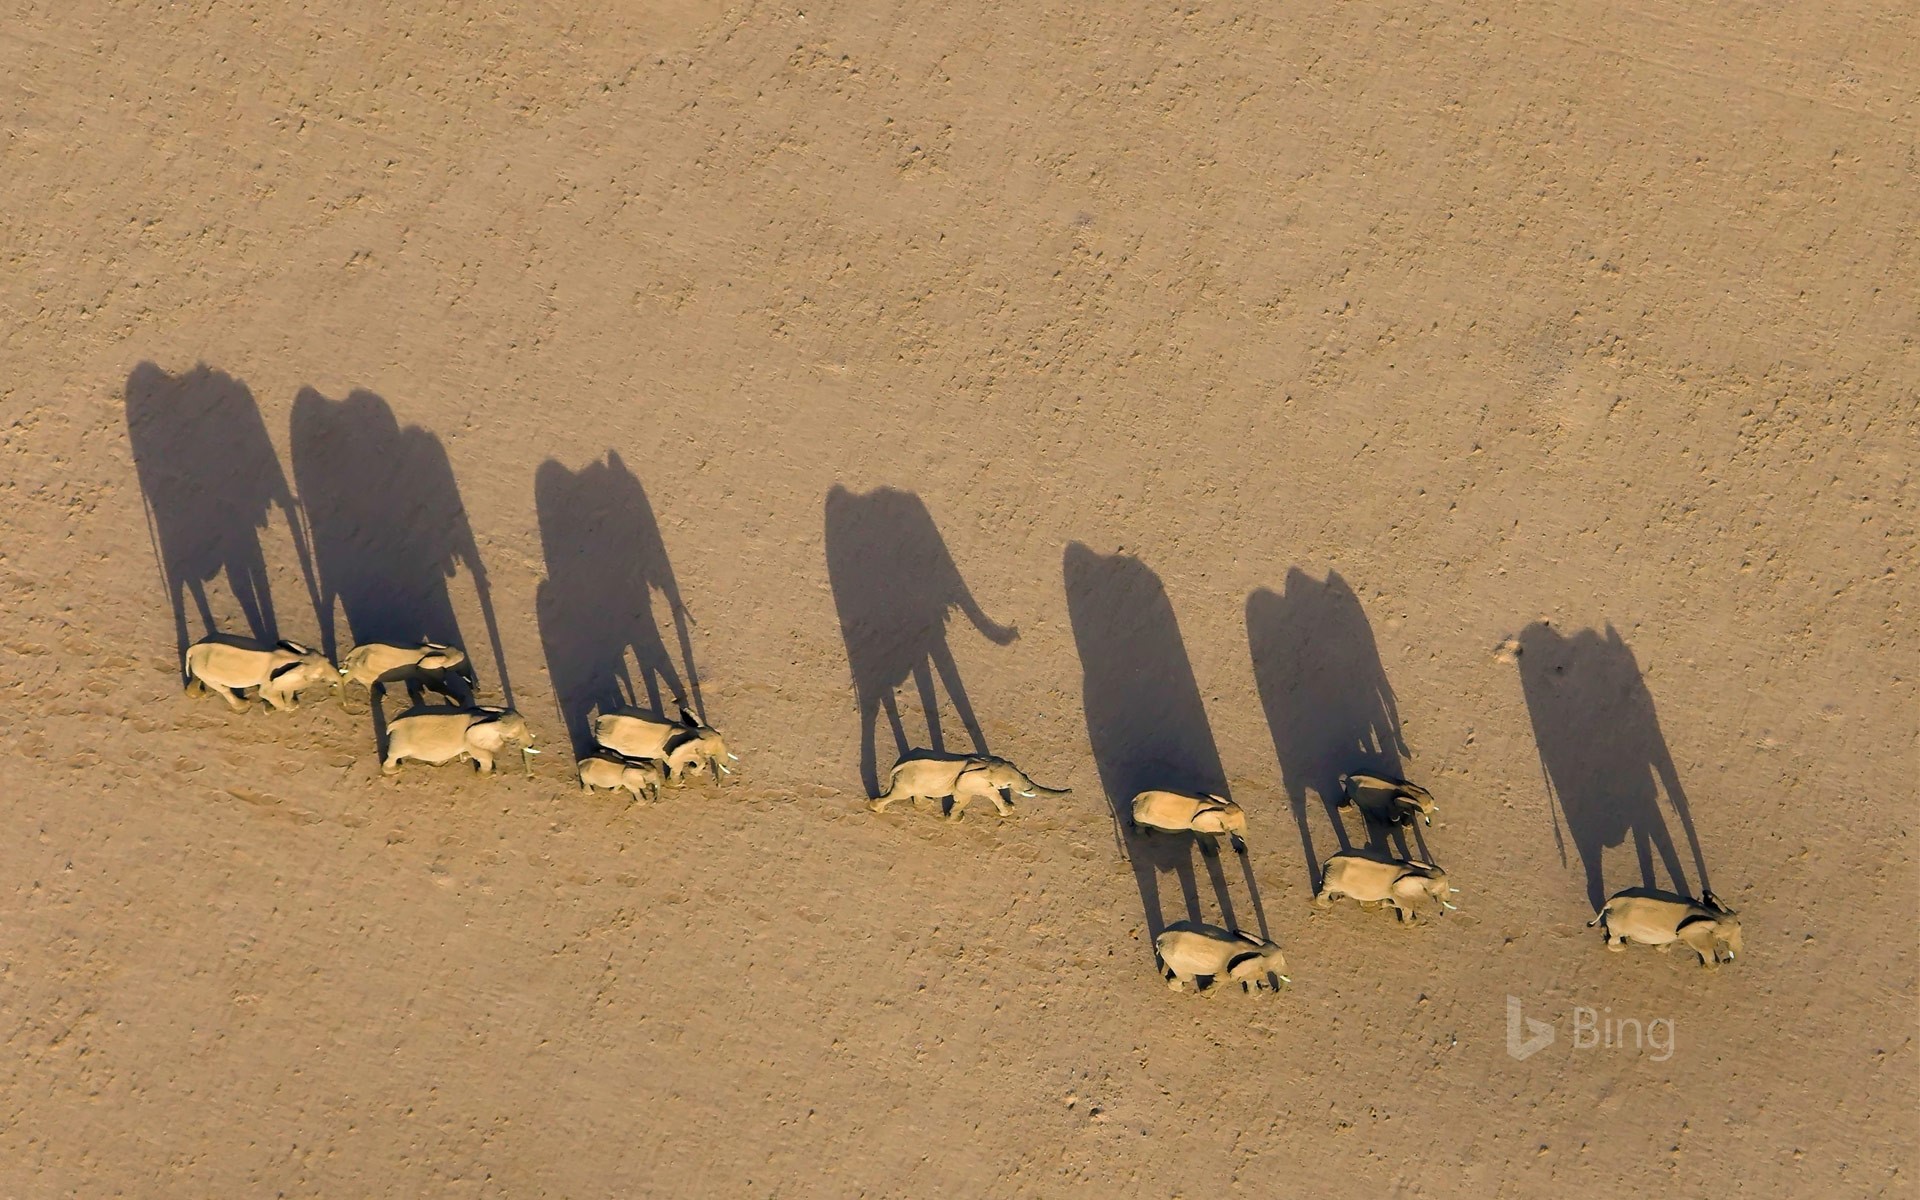 Elephant herd in Damaraland District, Namibia